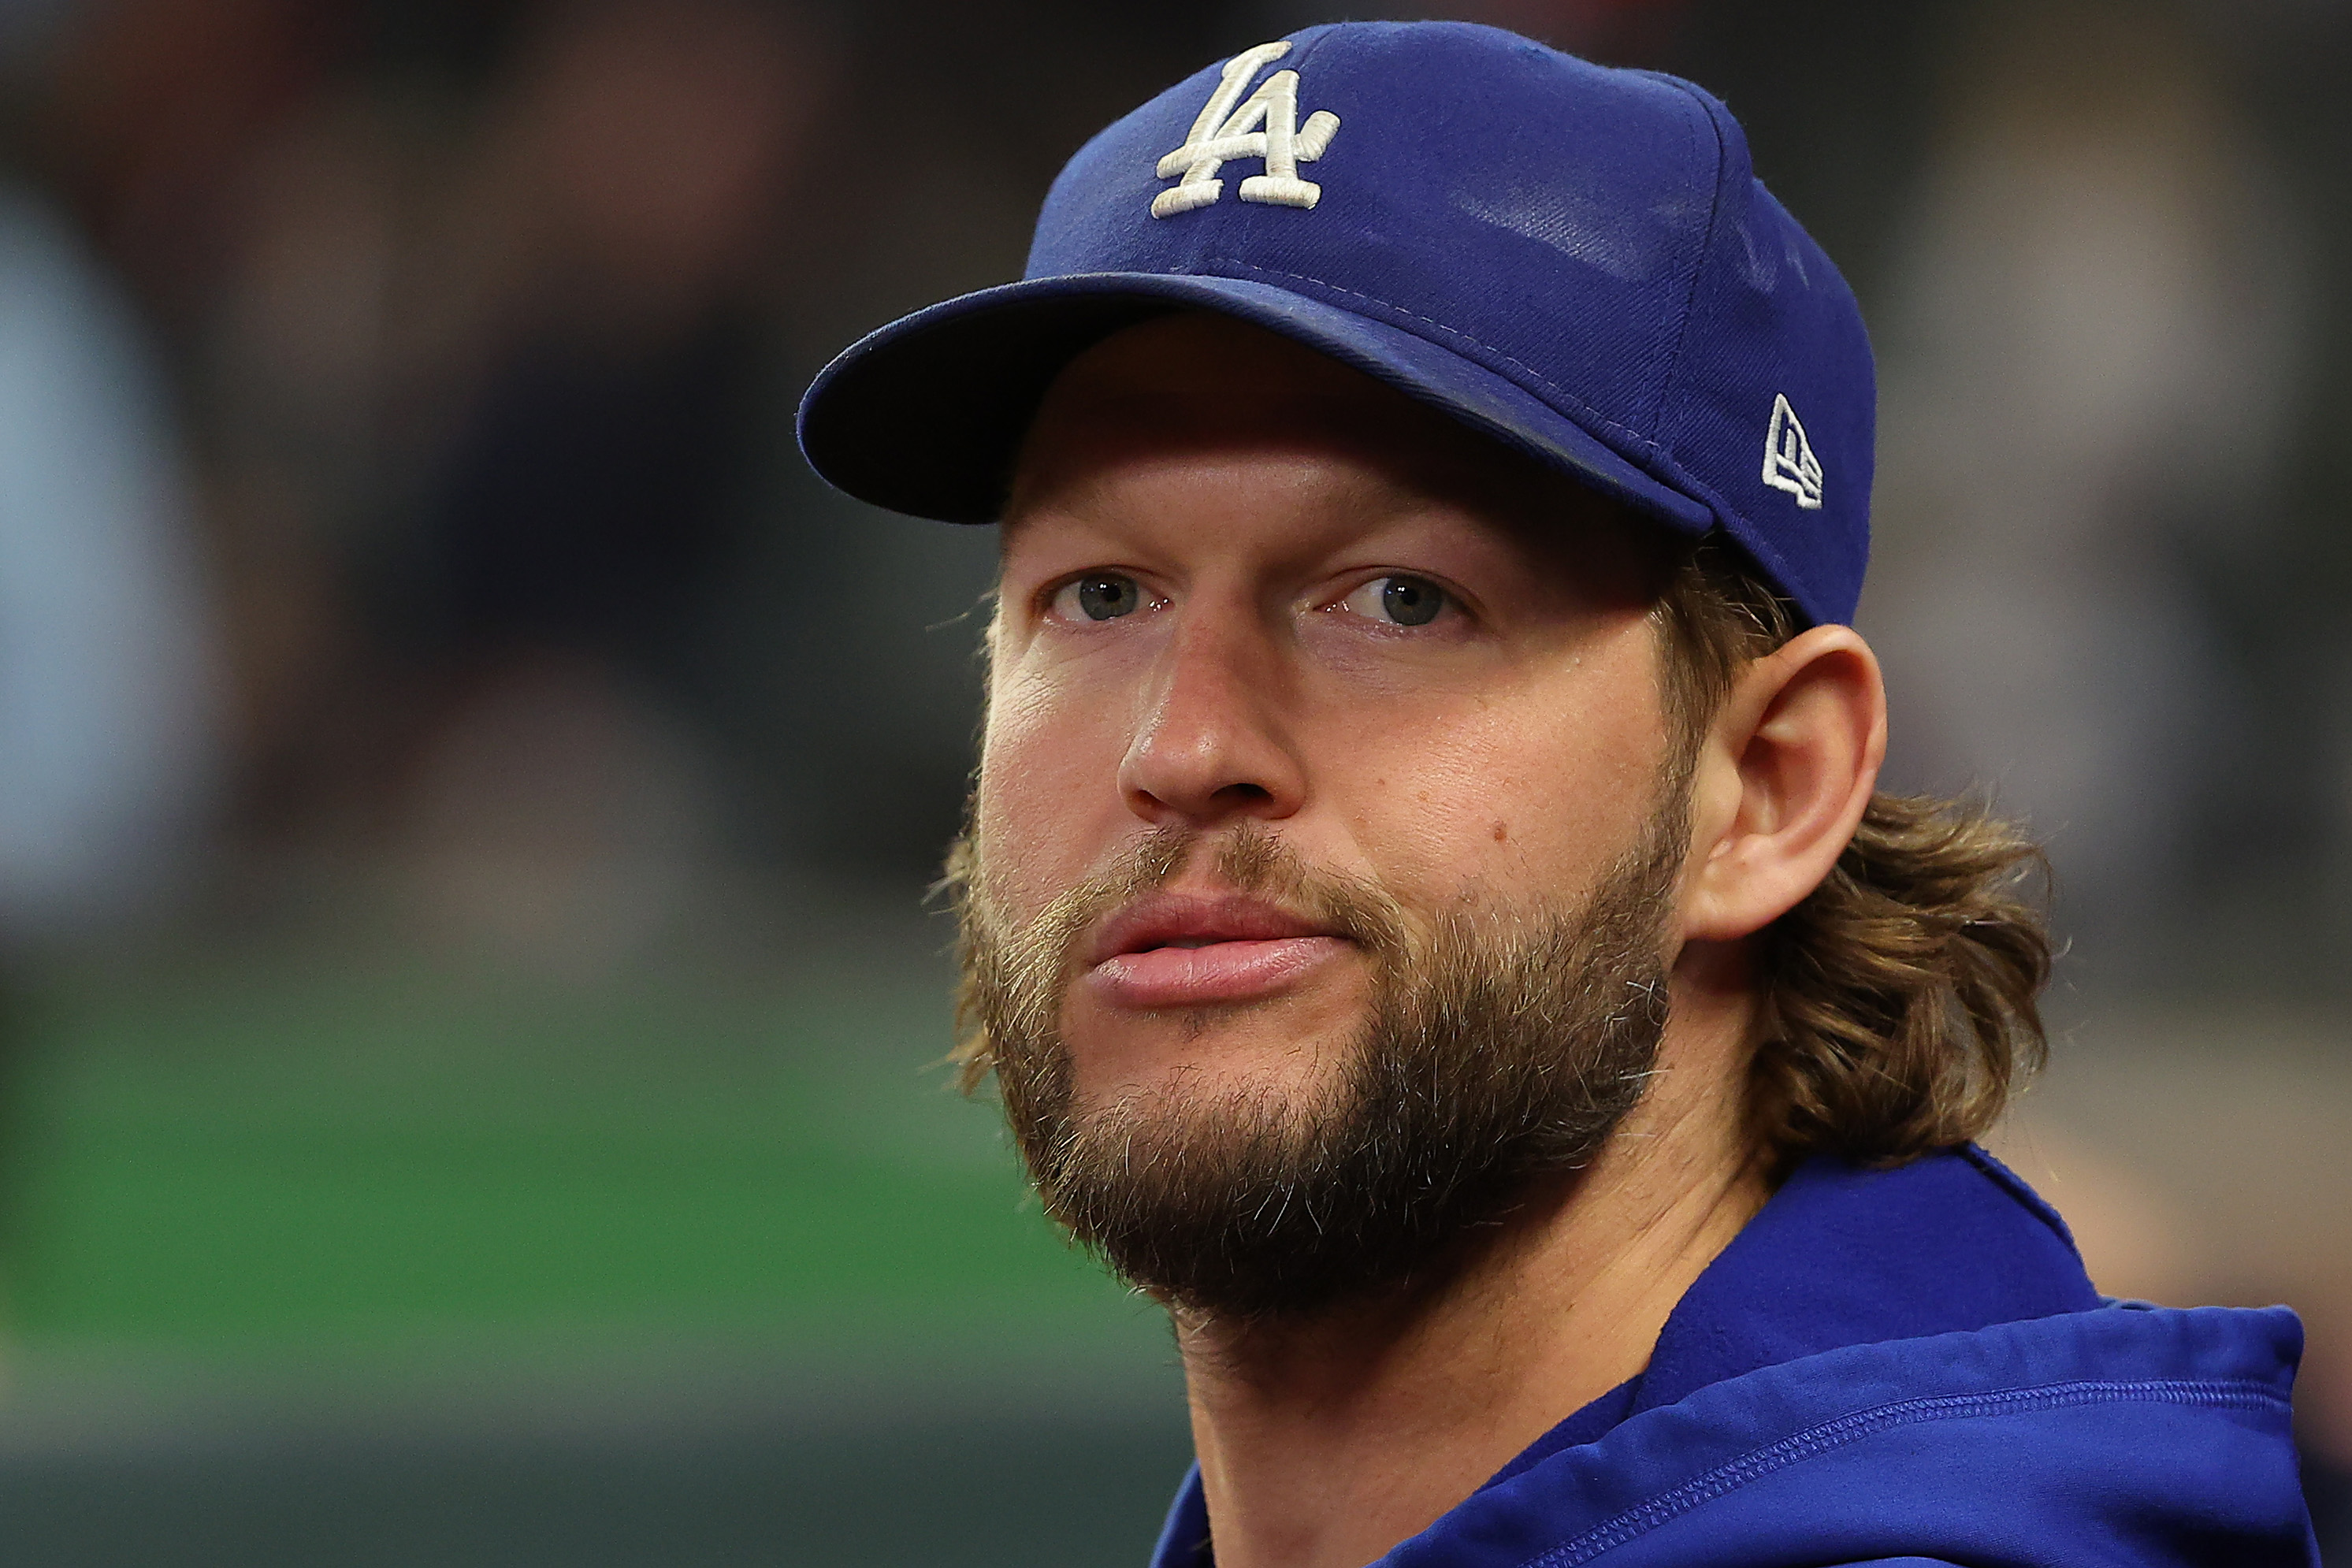 Dodgers News: Analyst Breaks Down How Clayton Kershaw Has Evolved His Game  to Remain Great - Inside the Dodgers